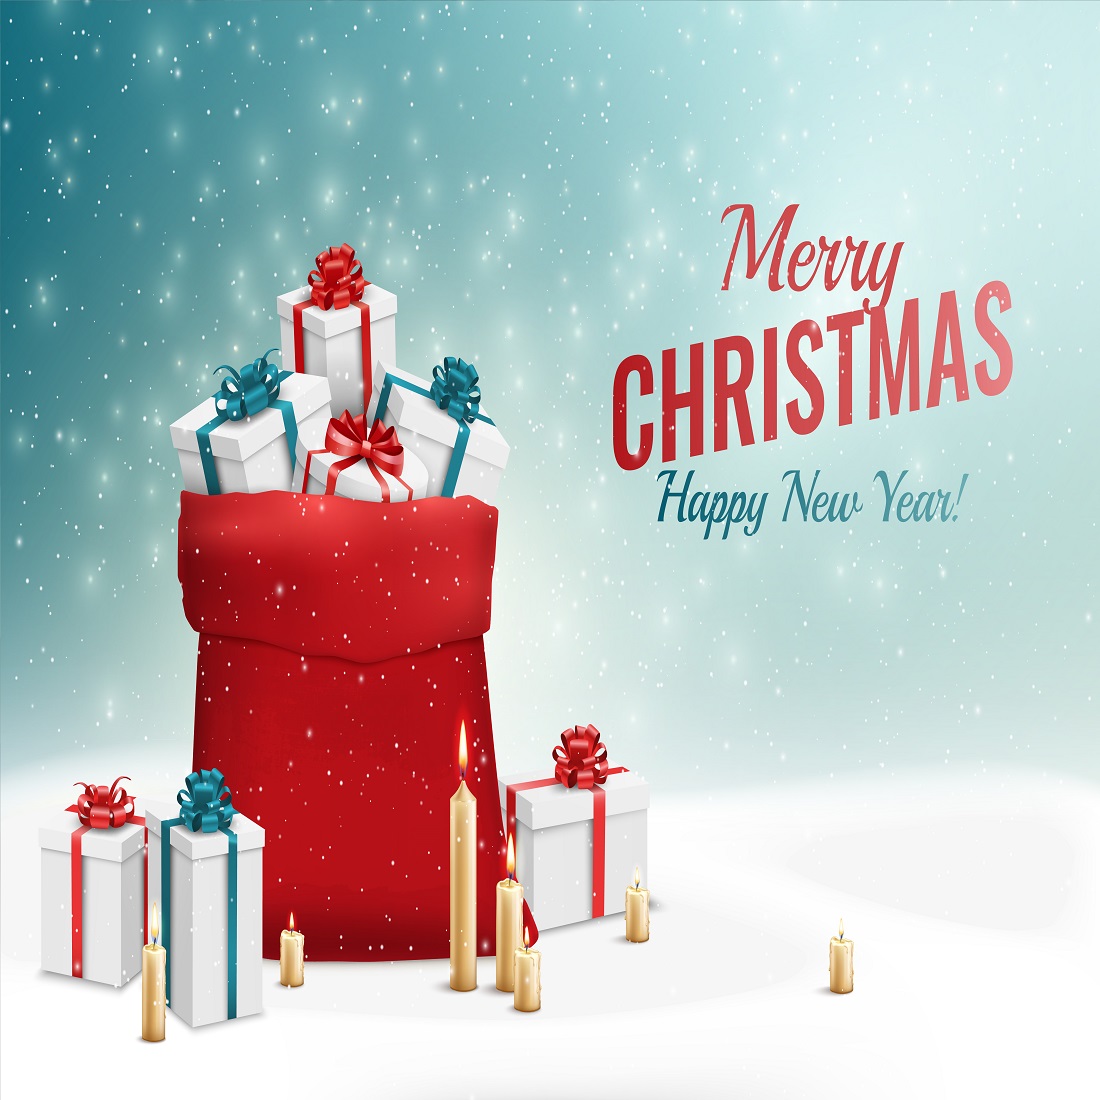 Merry Christmas happy new year greeting card preview image.